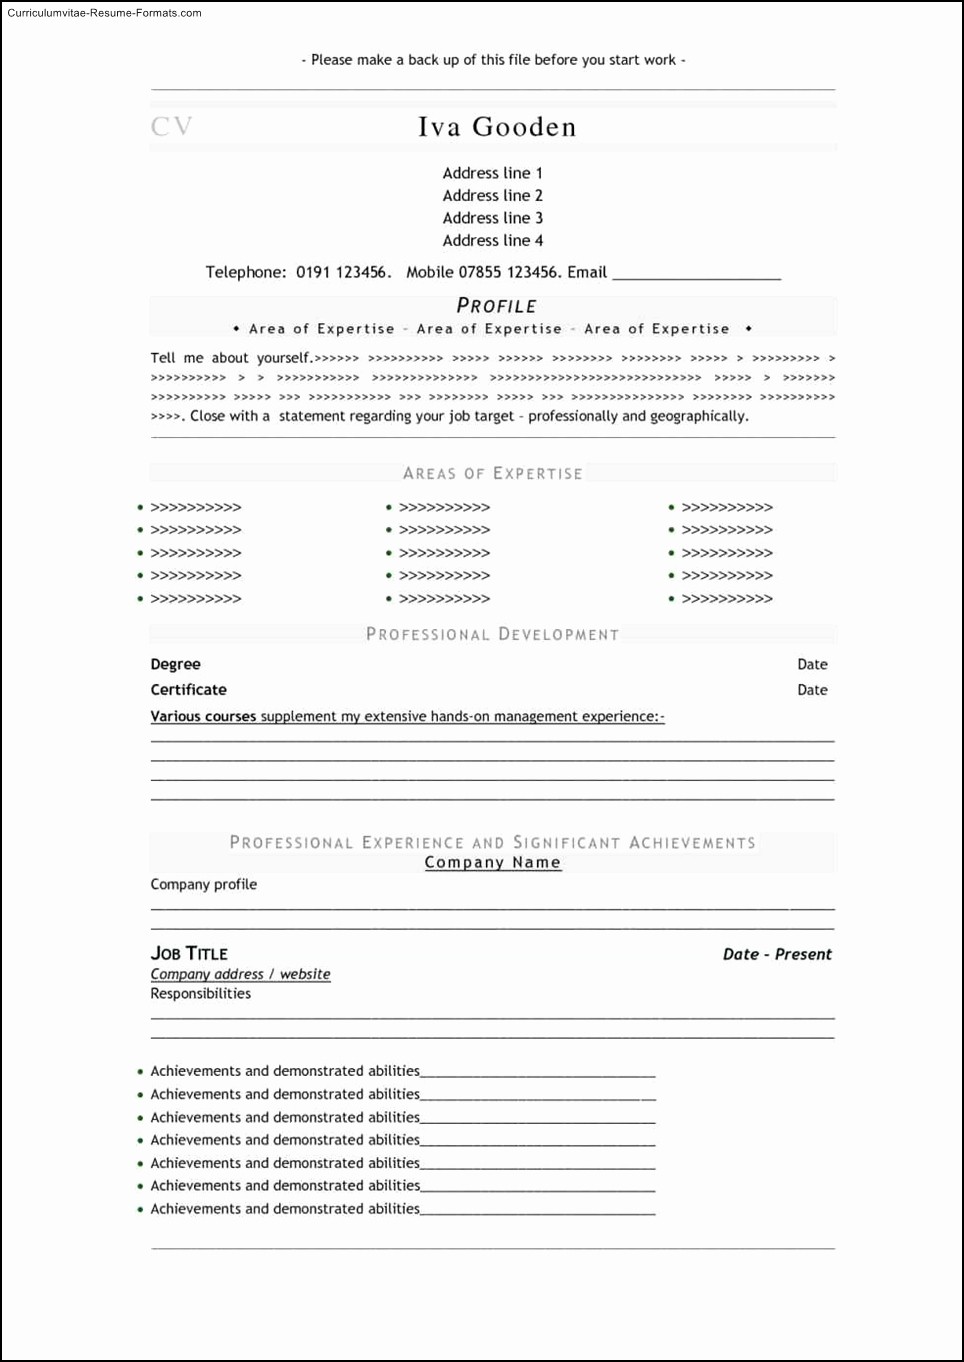 Professional Resume format Free Download New Download Professional Resume Template Free Samples